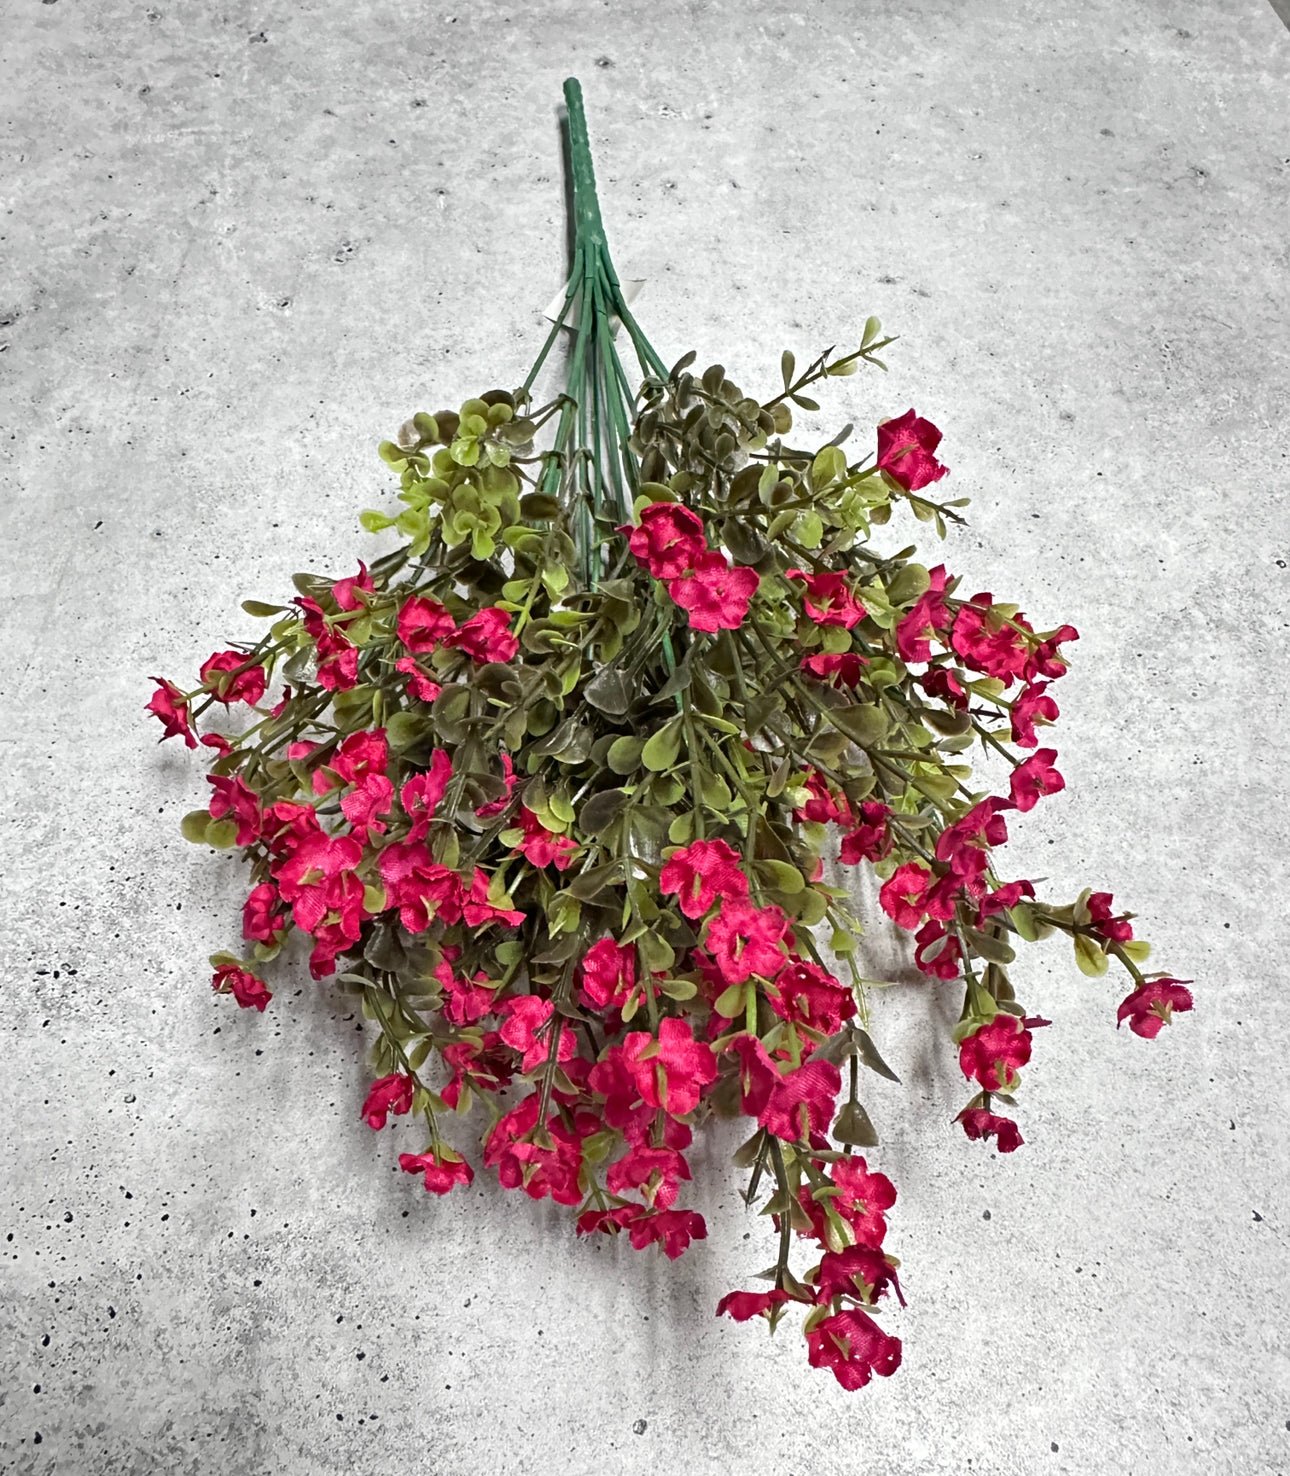 Hot pink filler flowers and boxwood greenery - Greenery Marketartificial flowers76628